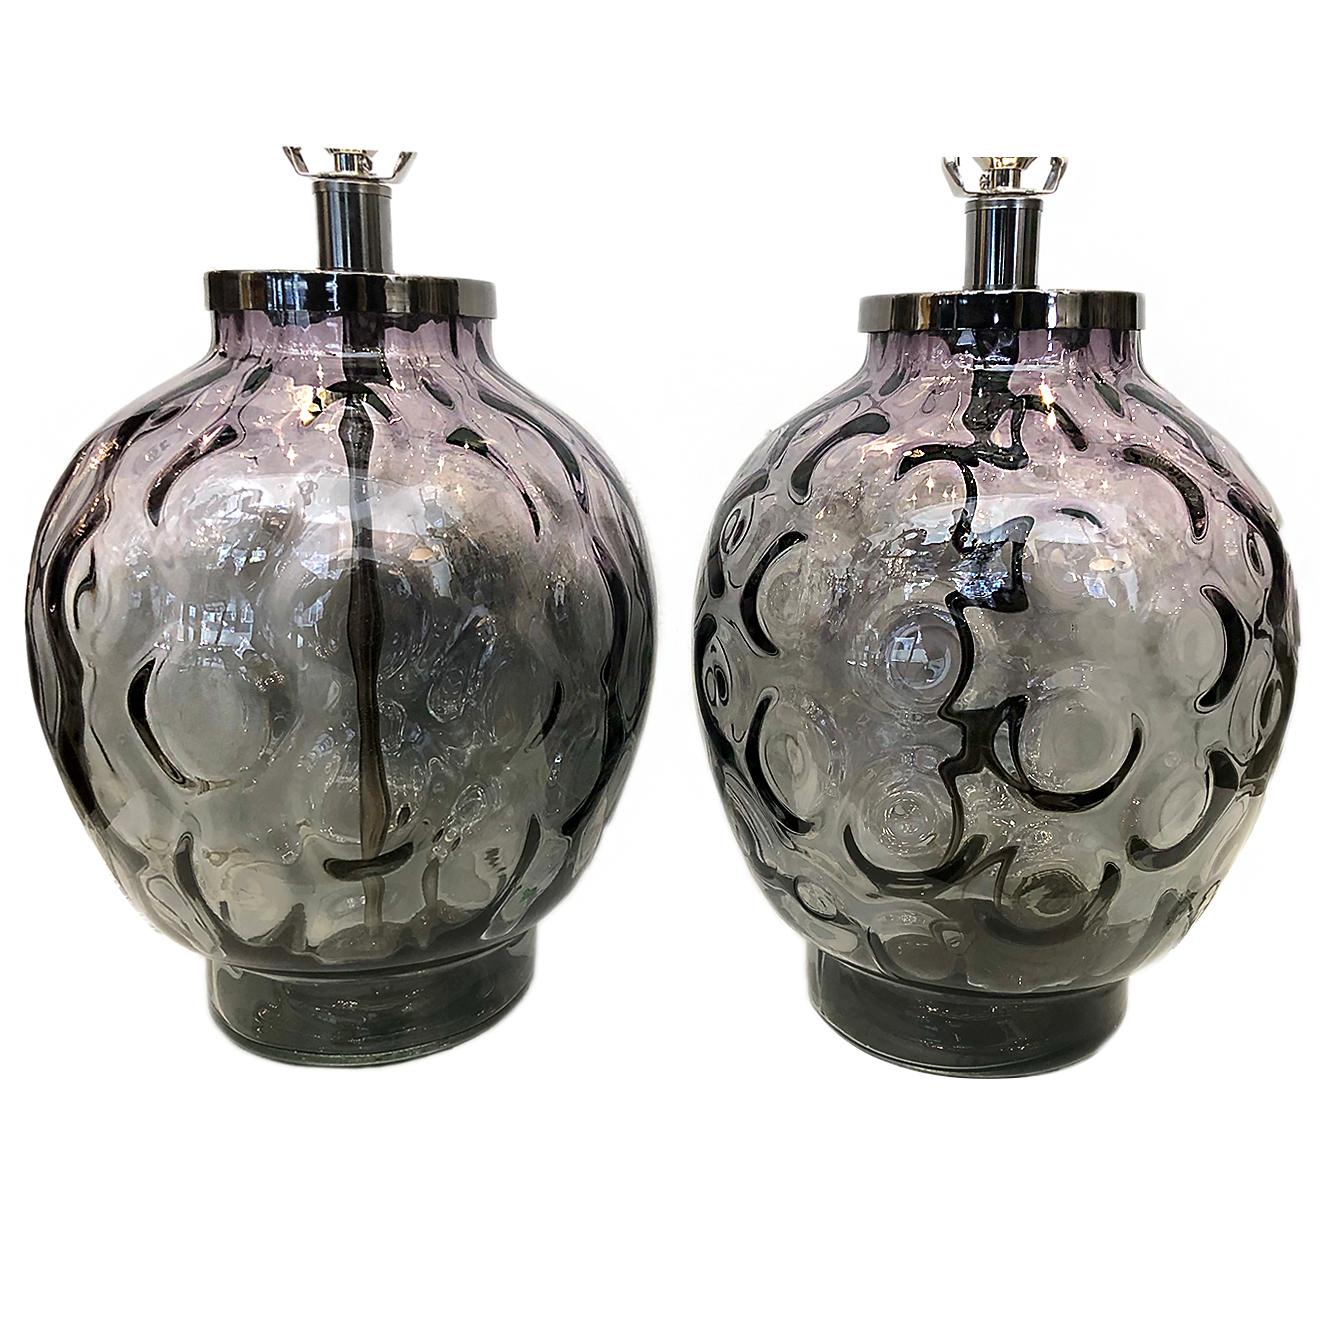 A pair of circa 1960’s Italian optical ombre glass table lamps.

Measurements:
Height of body: 14.25″
Diameter: 11″
Height to shade rest: 24″